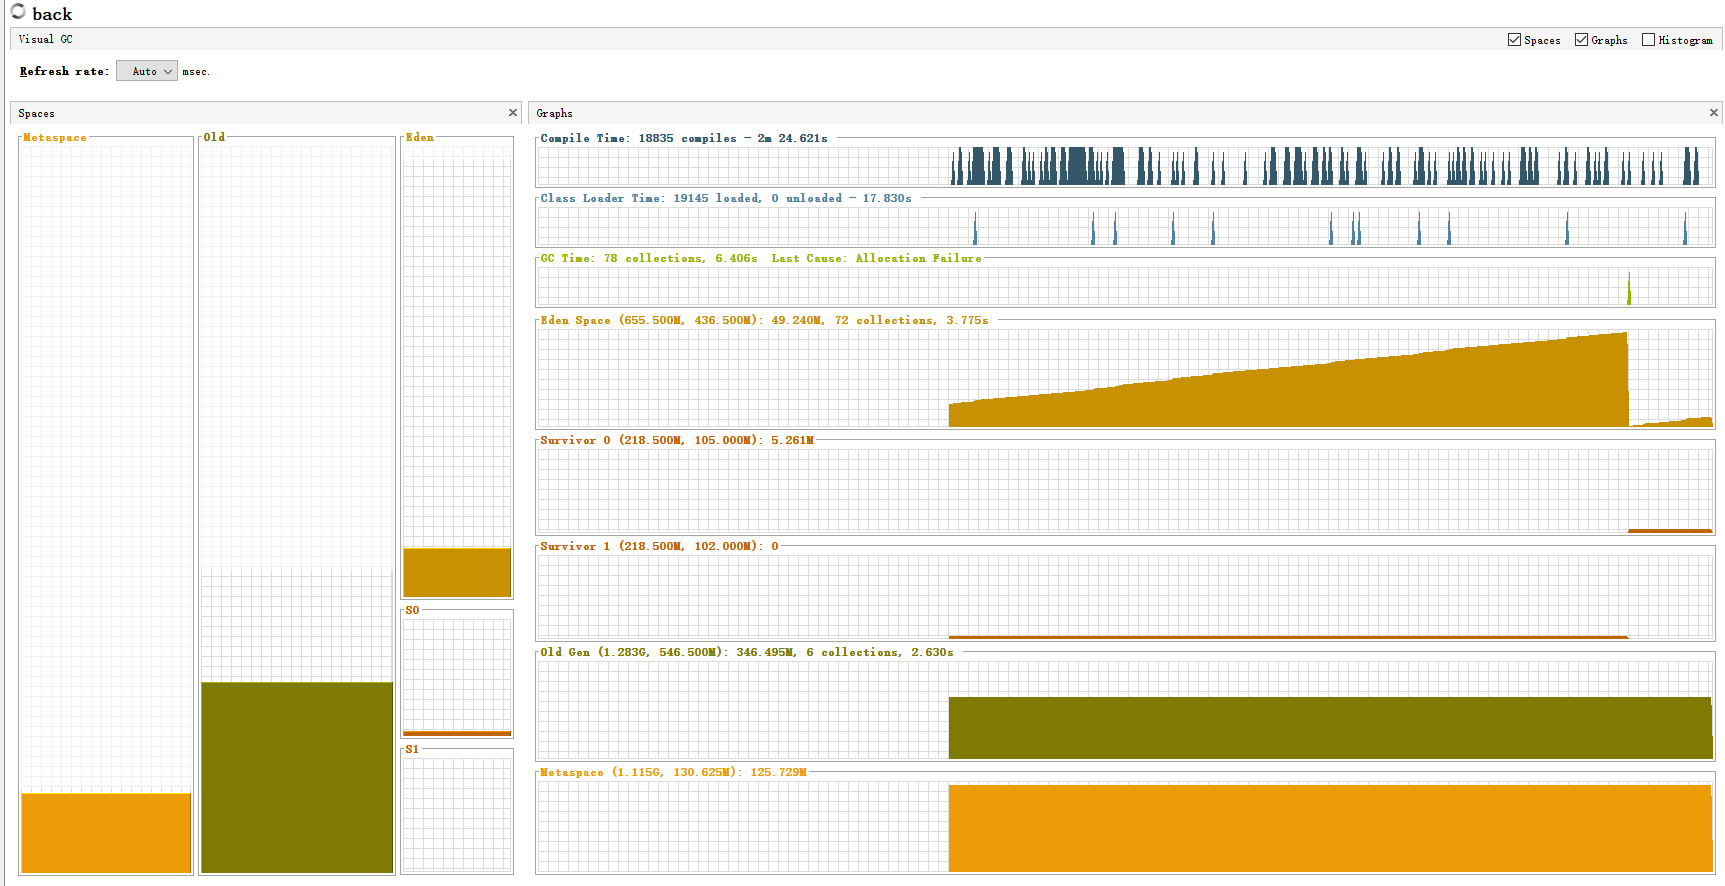 Using visual VM to remotely monitor the server status (graphical interface)